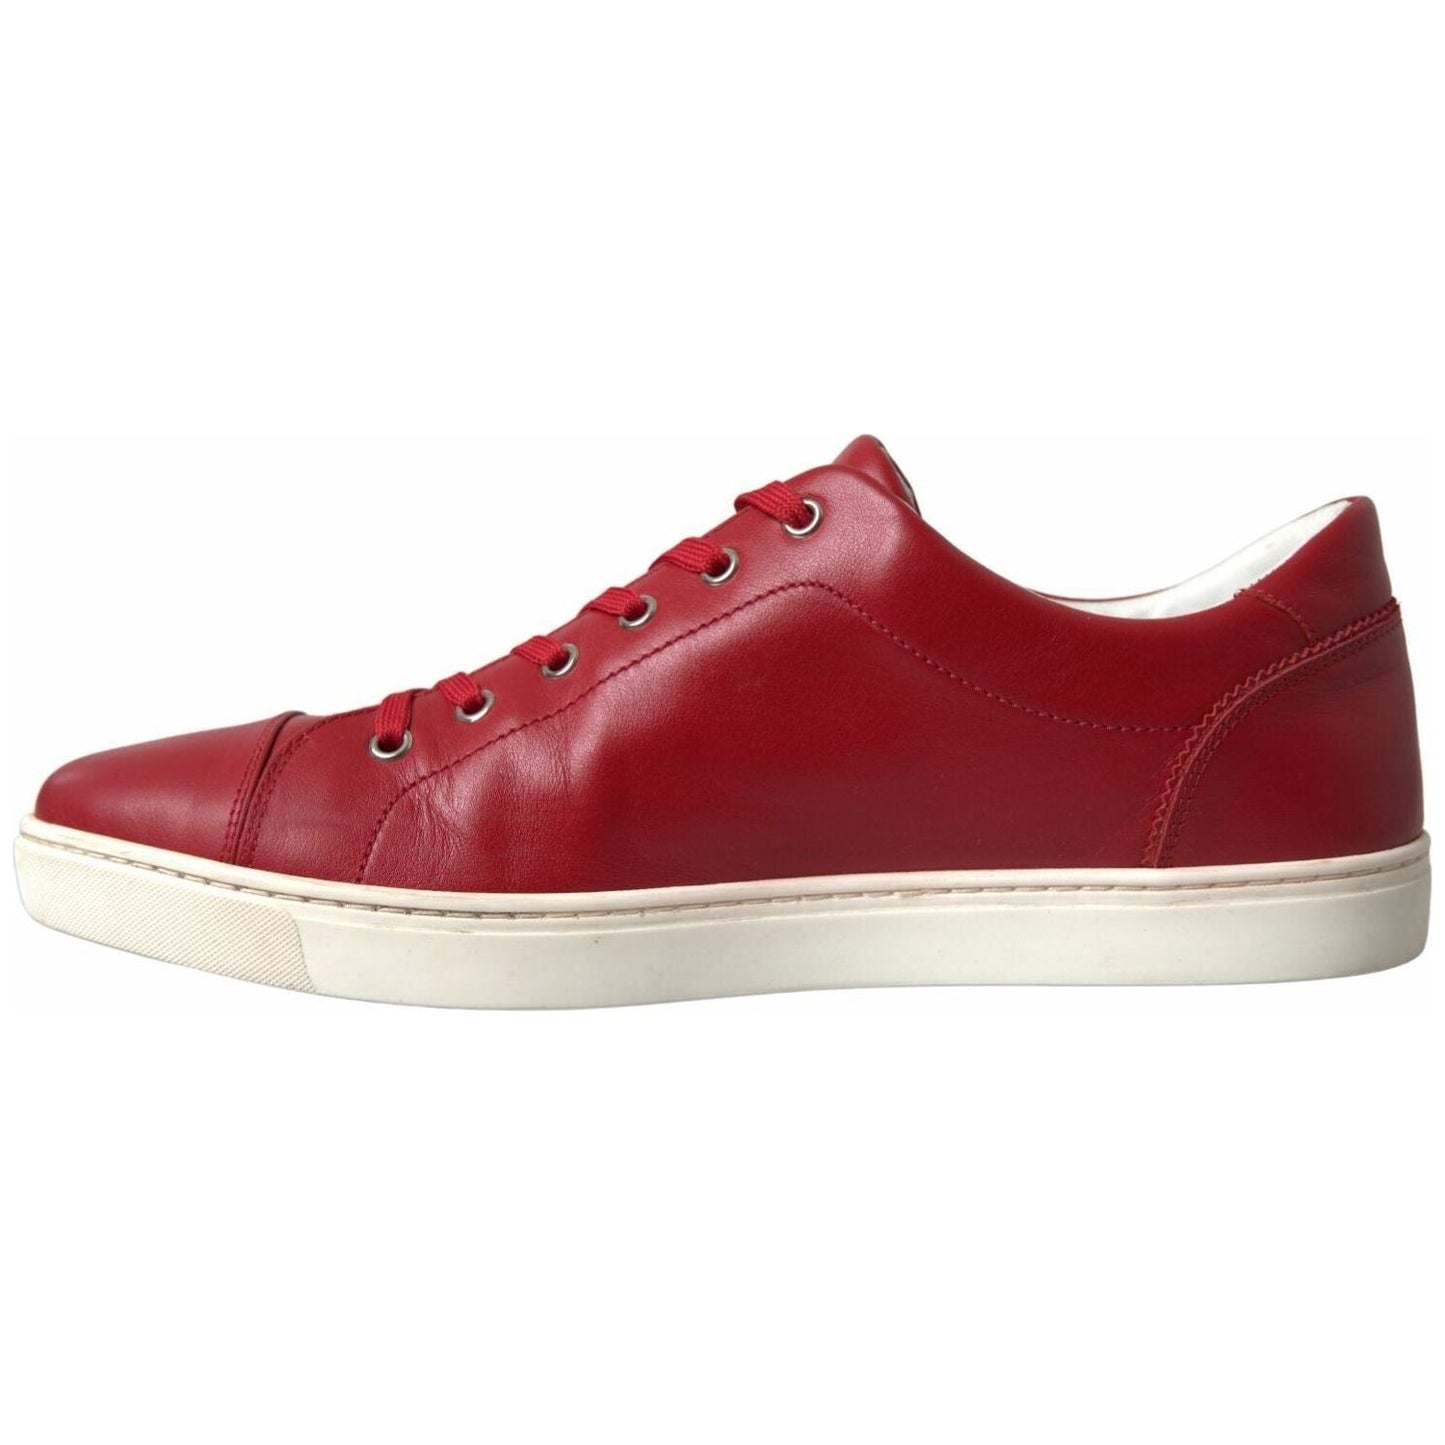 Dolce & Gabbana Elegant Red Leather Low Top Sneakers shoes-red-portofino-leather-low-top-mens-sneakers